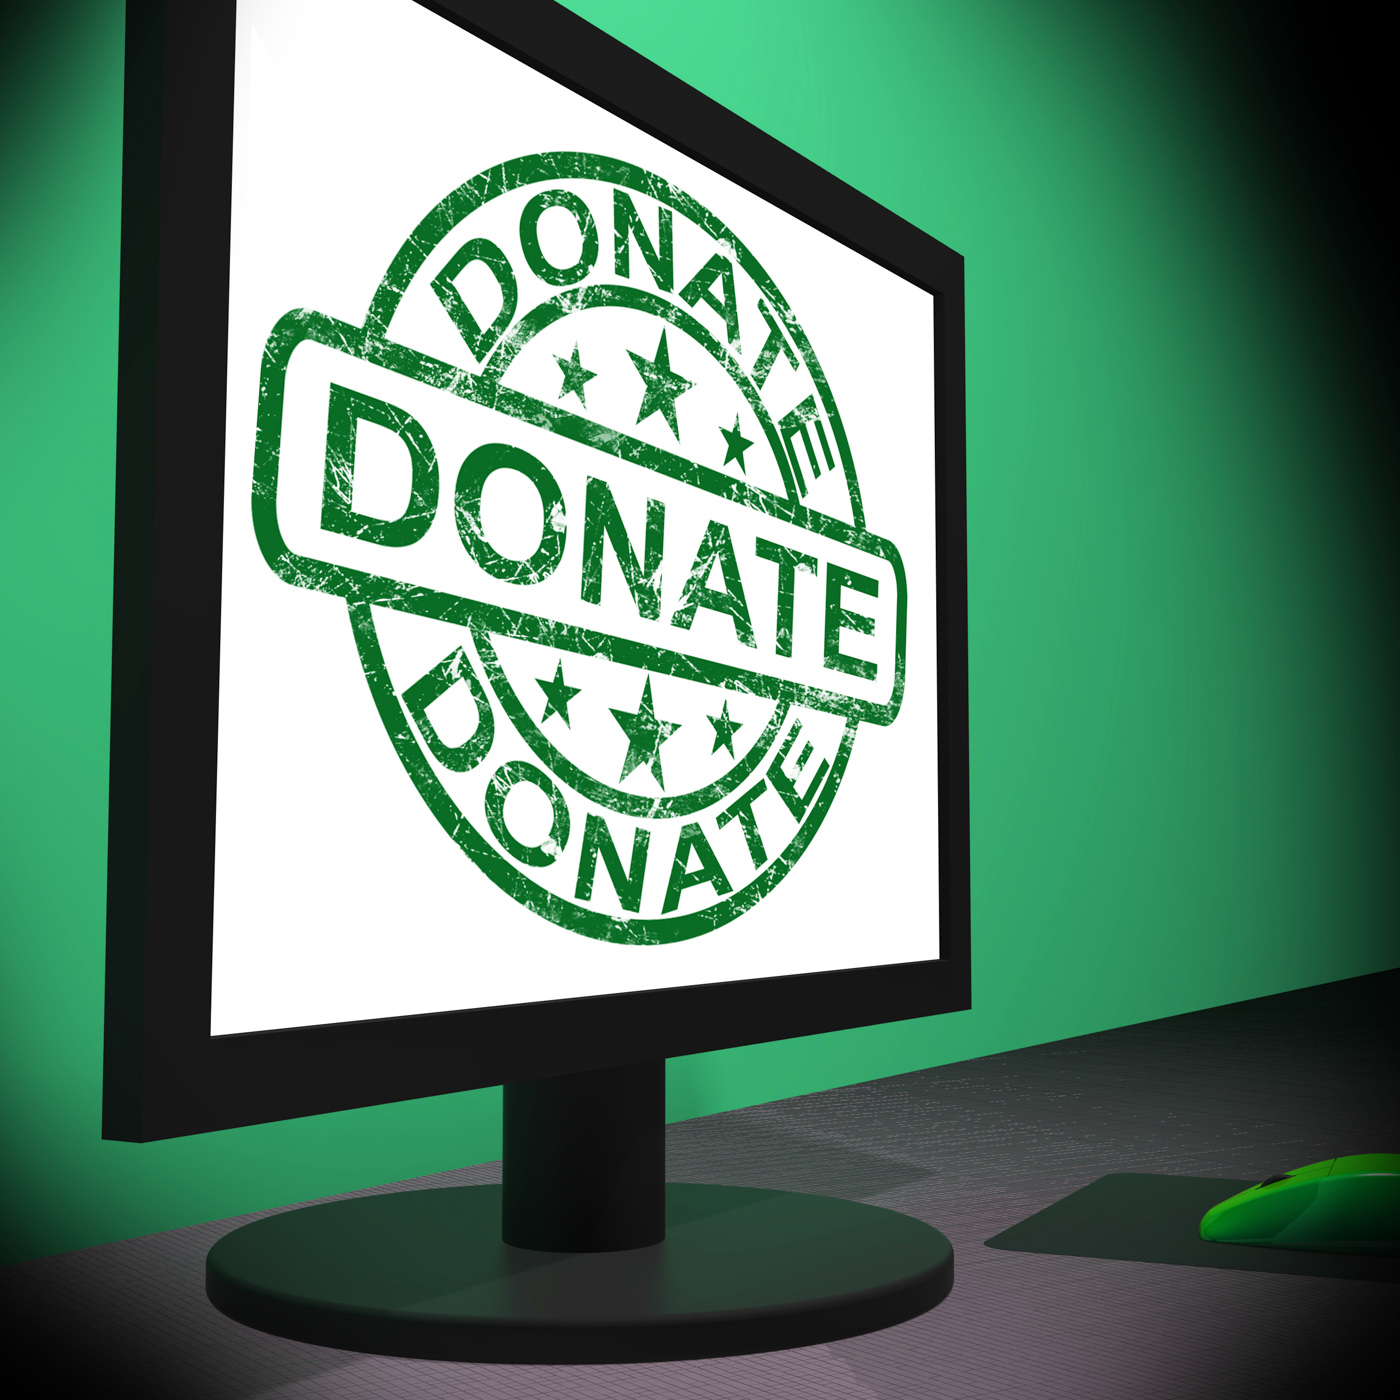 Donate computer shows charitable donating and fundraising photo